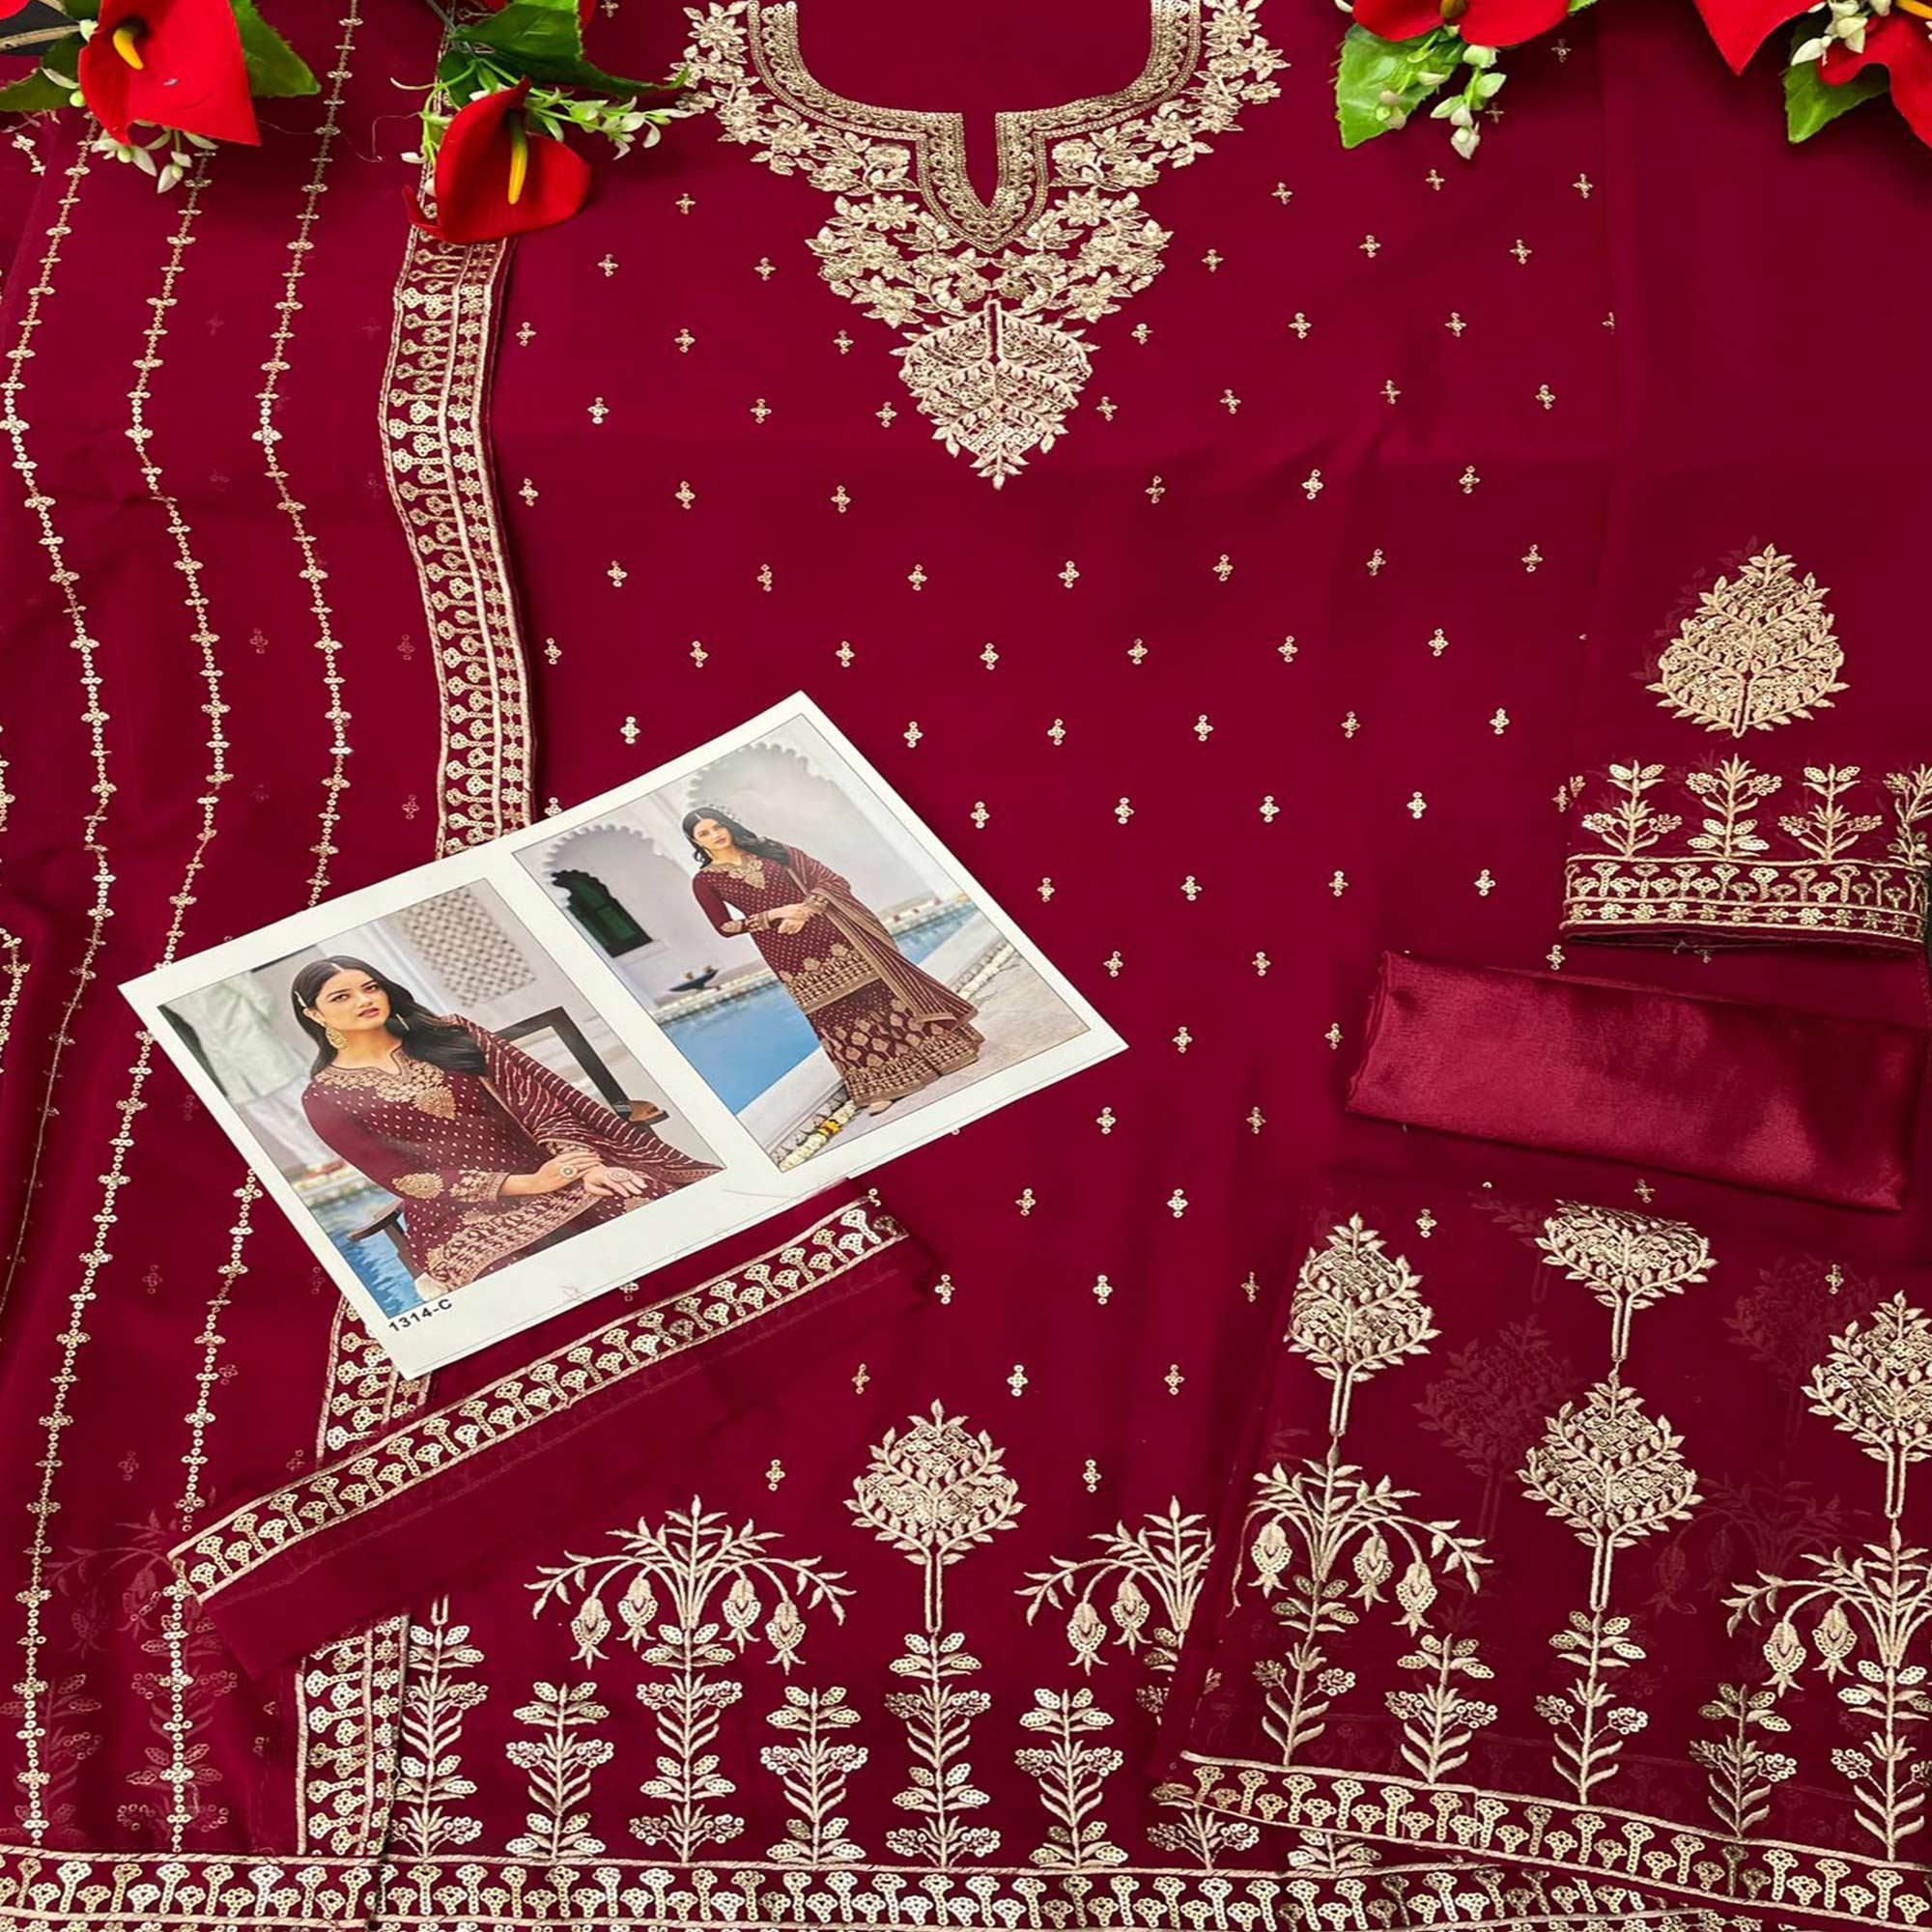 Maroon Partywear Sequence & Embroidered Faux Georgette Salwar Suit - Peachmode